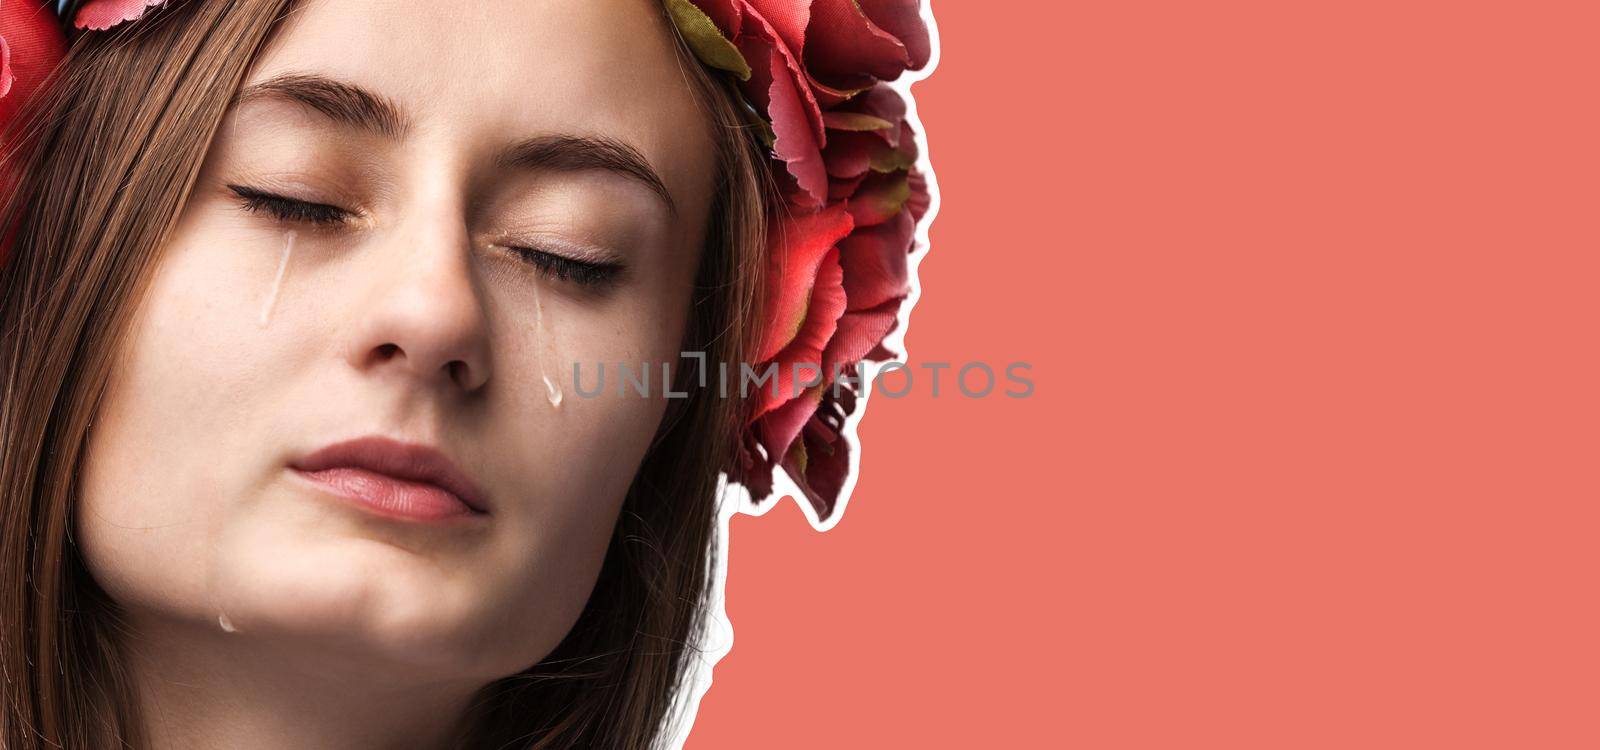 Close-up portrait of beautiful crying girl with tears. Magazine style collage with copy space and trendy coral color background